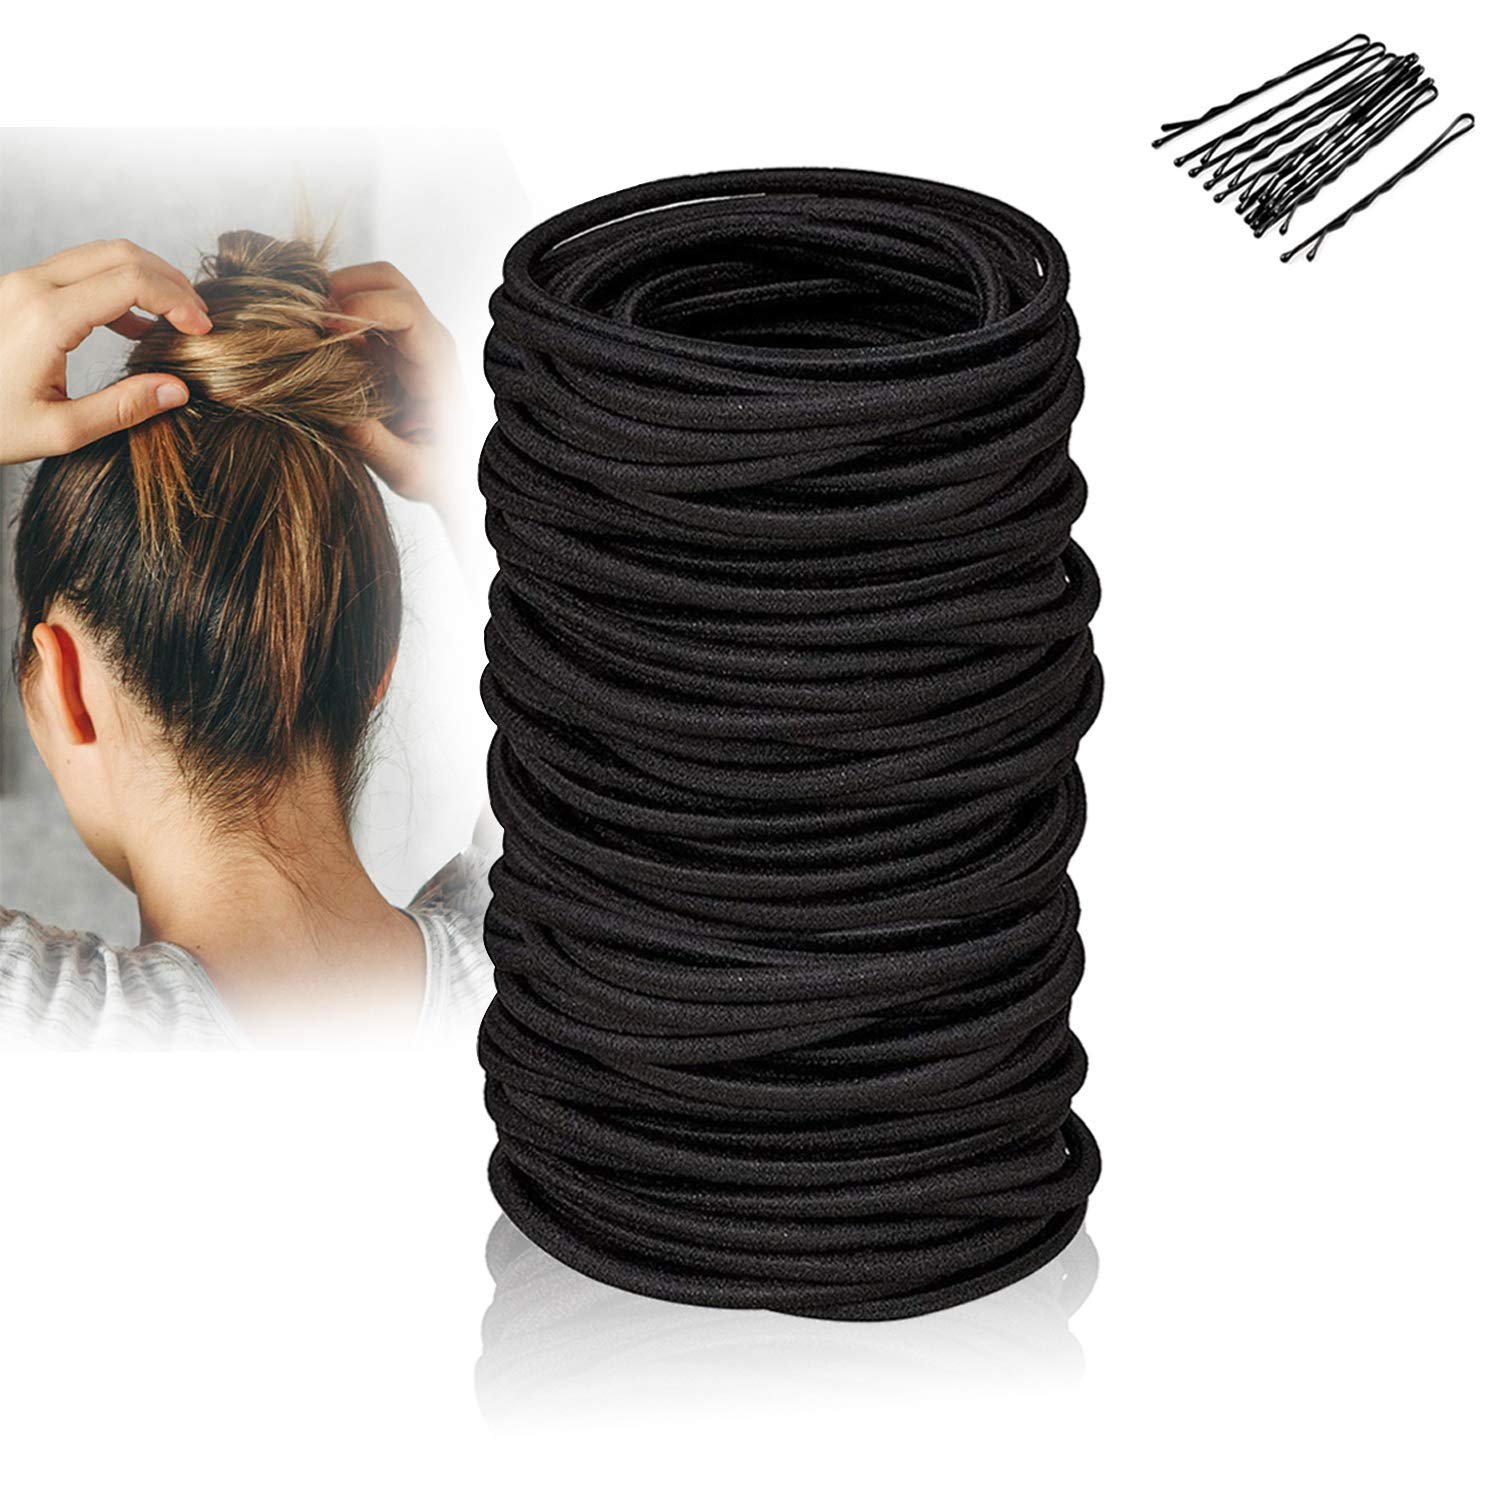 Black Elastic Hair Bands 120 Pcs Rubber Hair Ties for Thick Heavy and Curly Hair